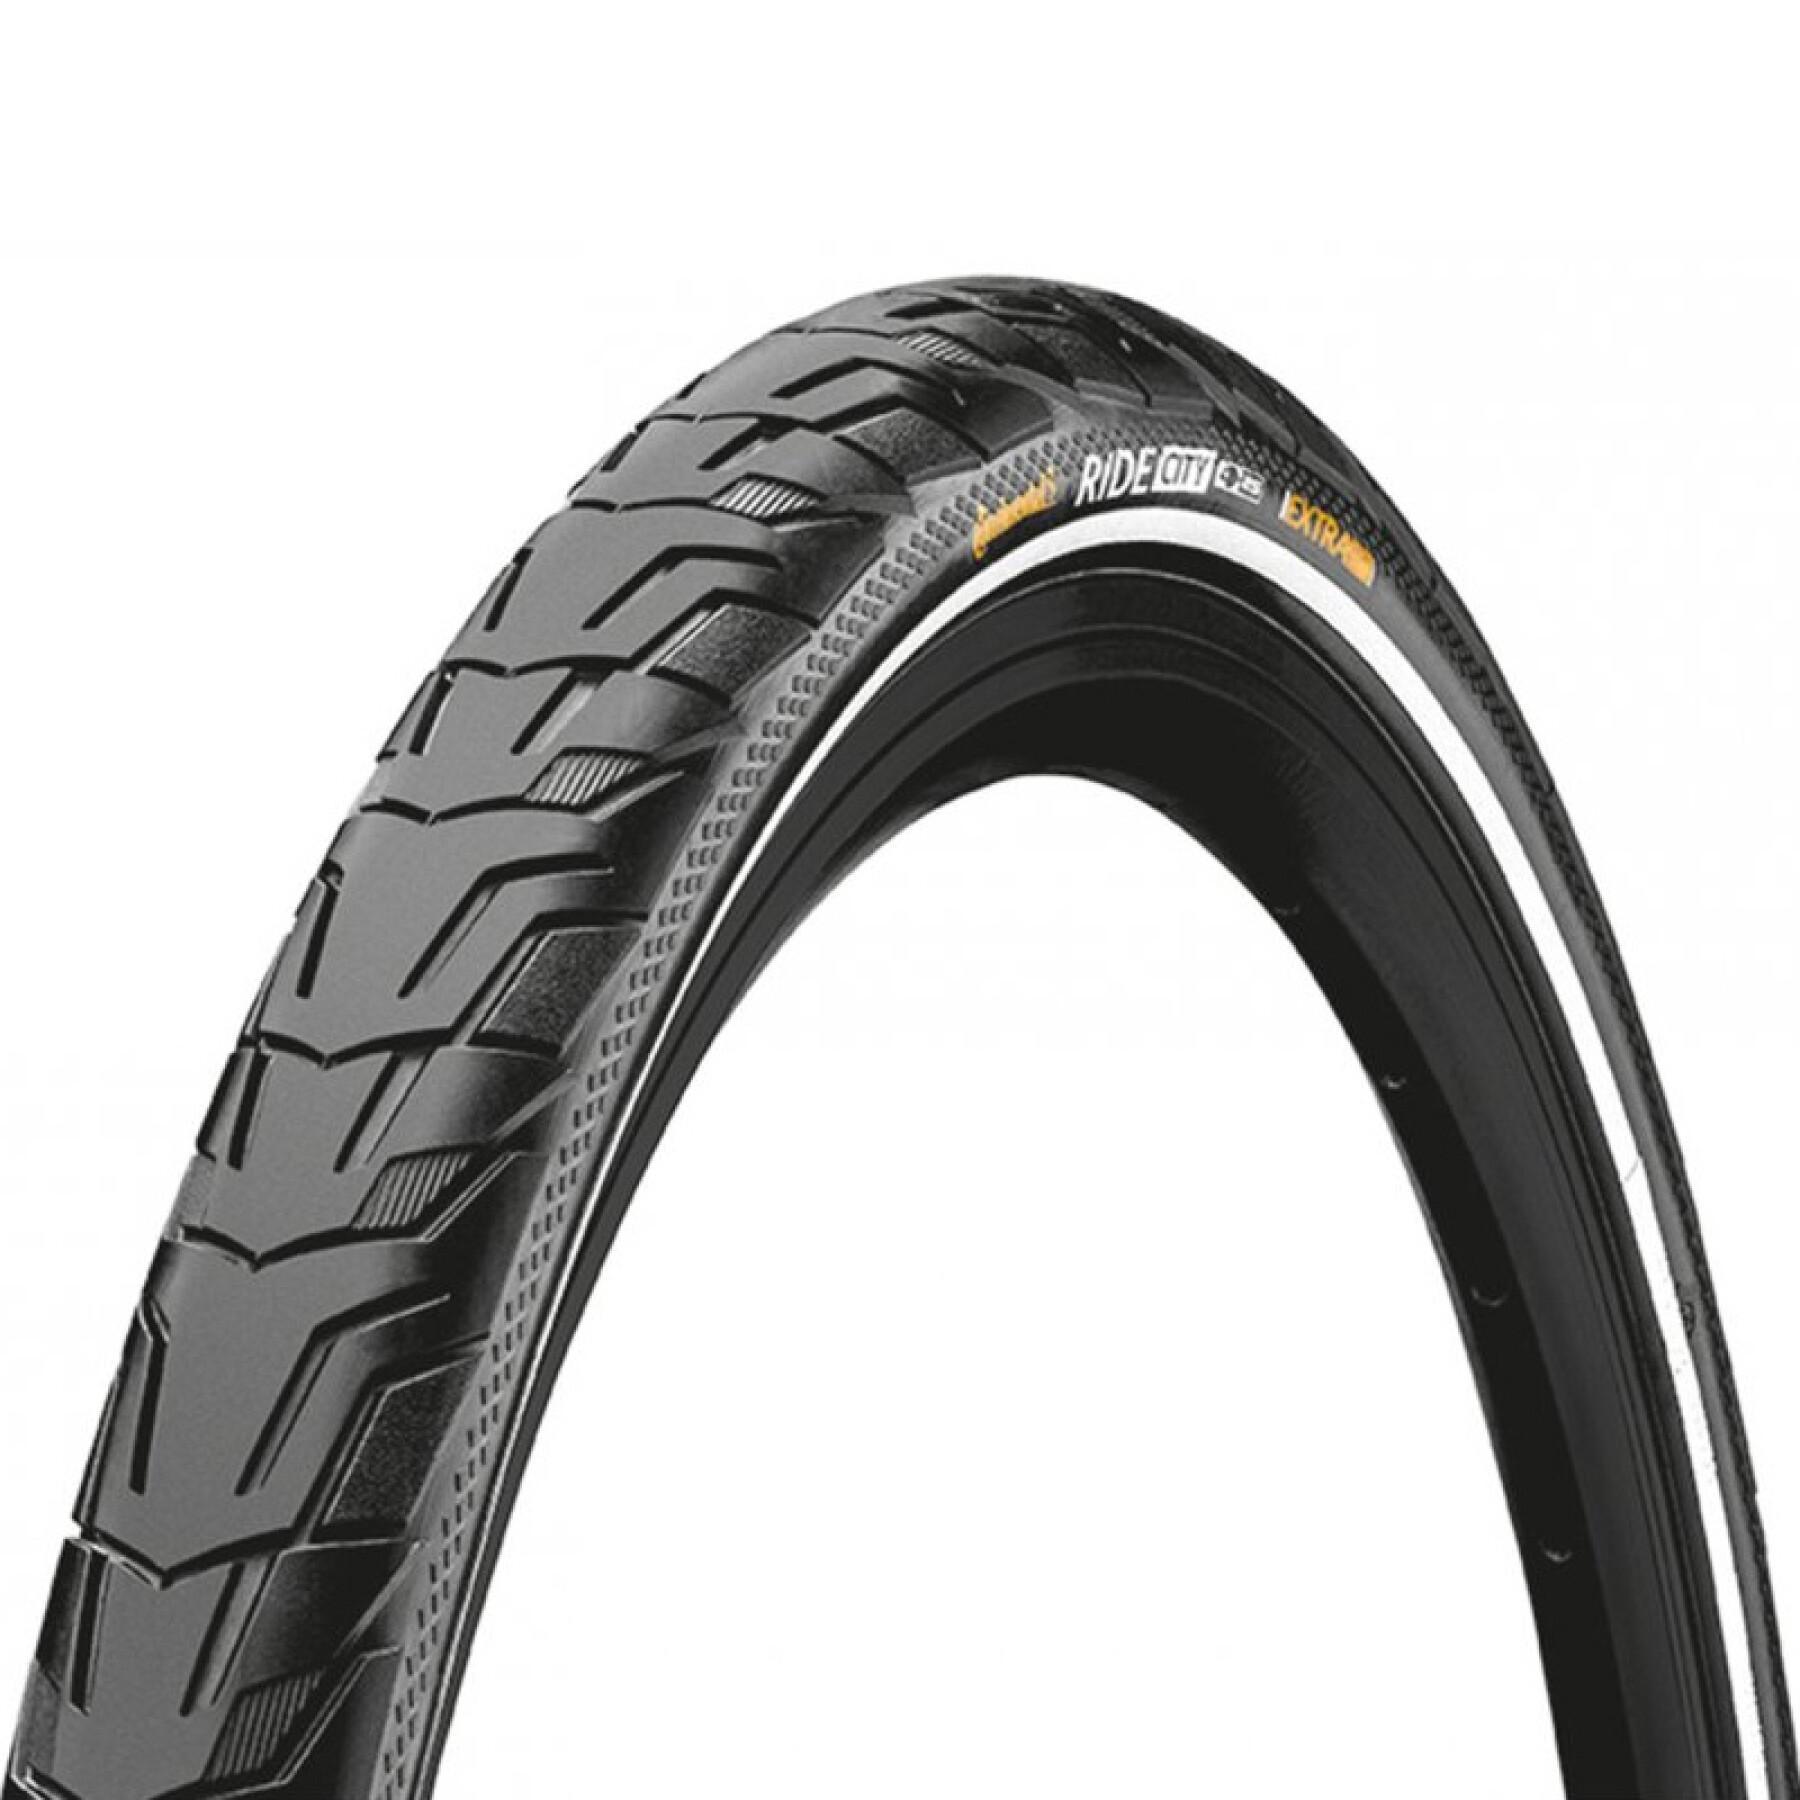 Neumáticos Continental Ride City 28x175 Extrapuncture